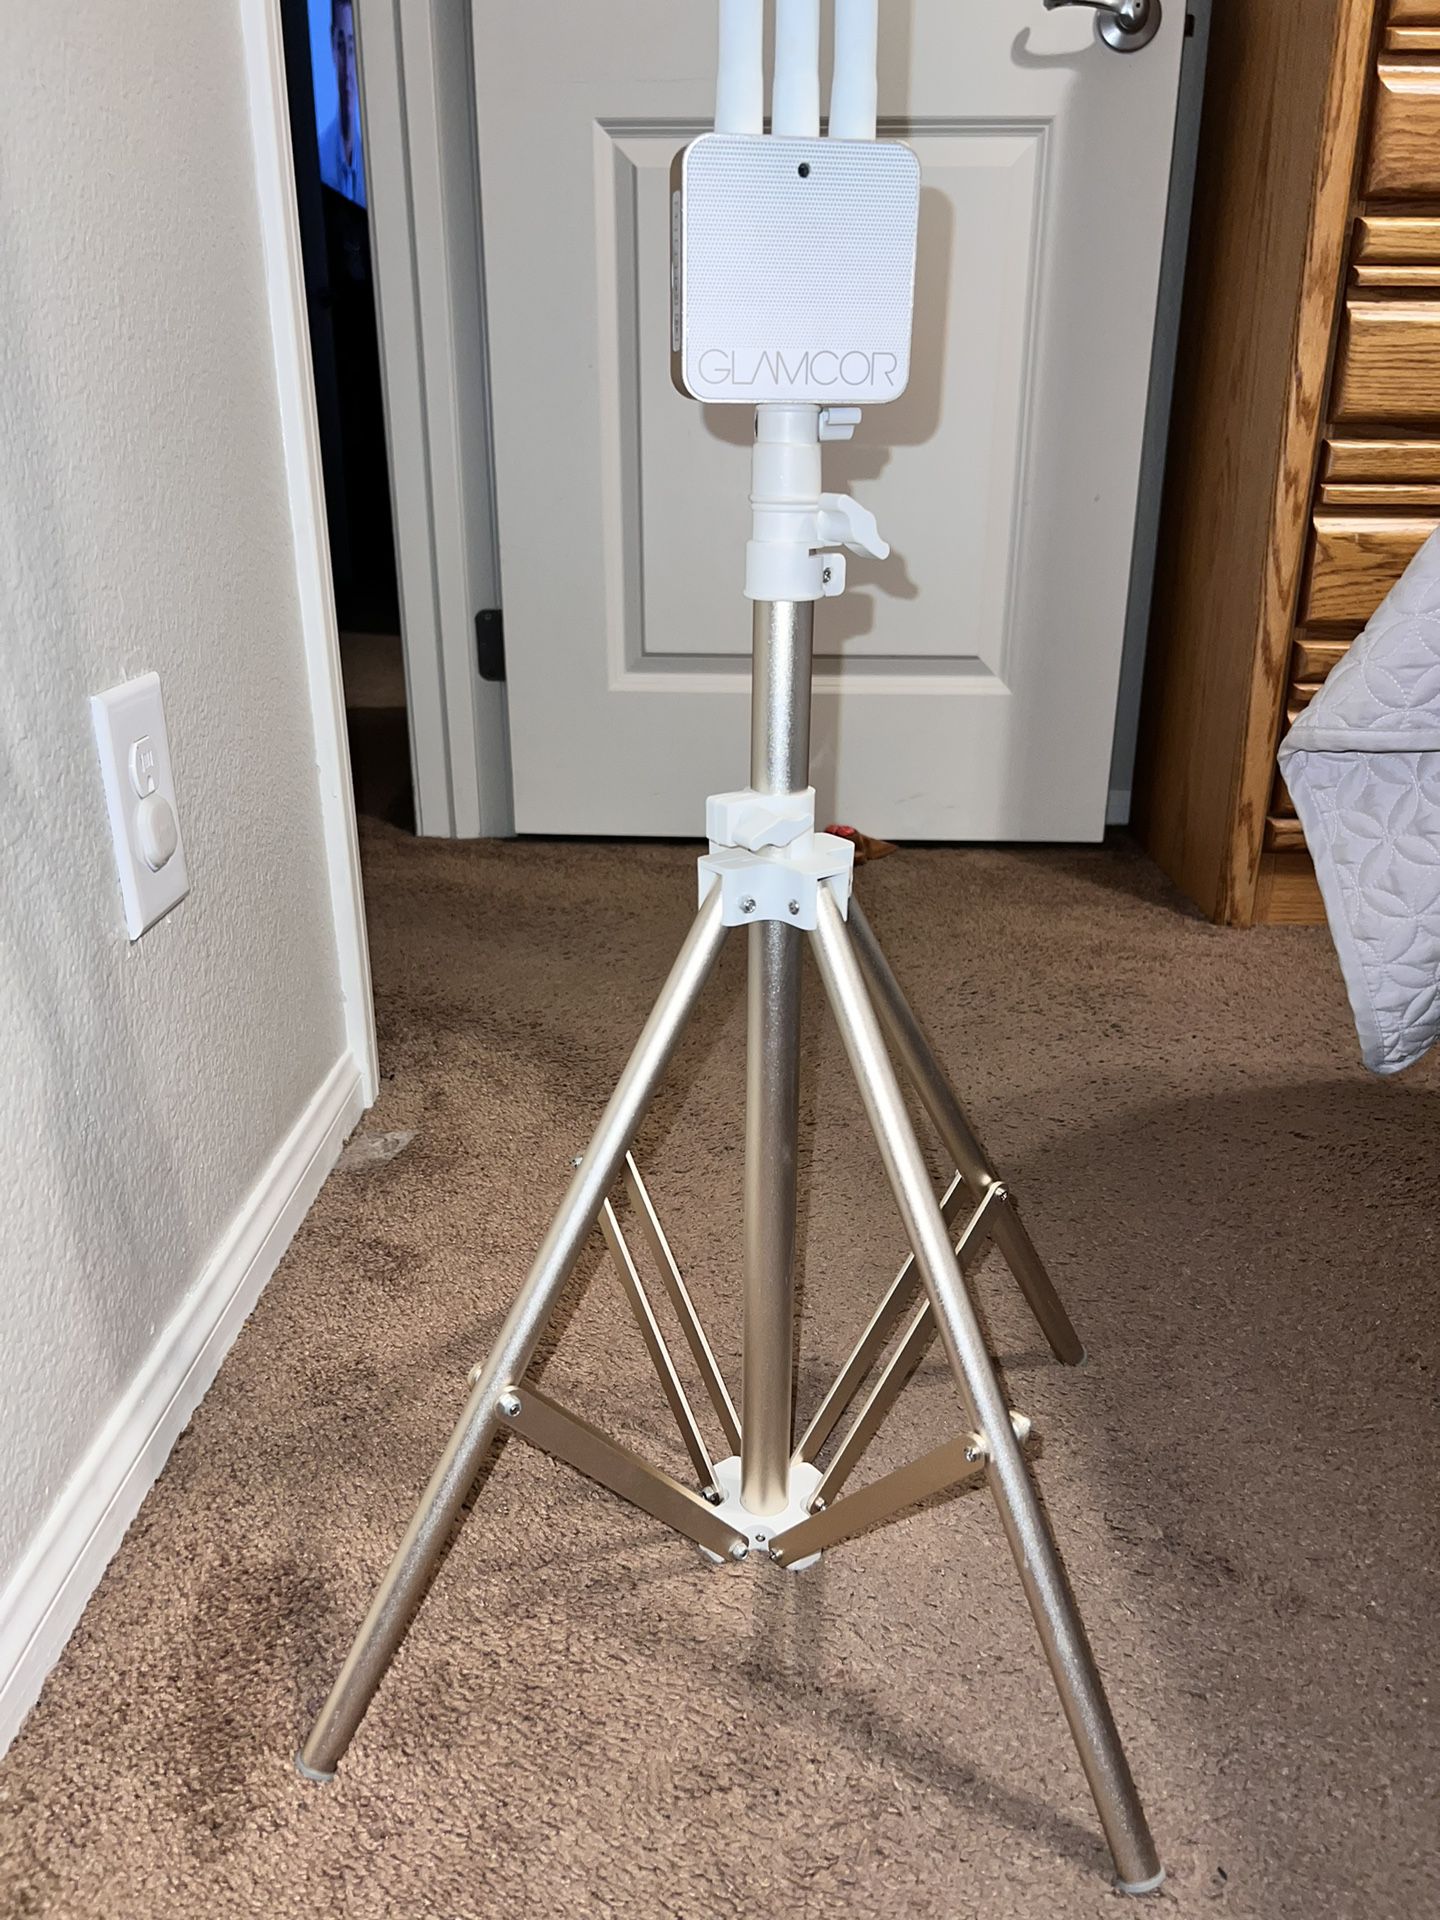 GLAMCOR lights With Tripod Stand